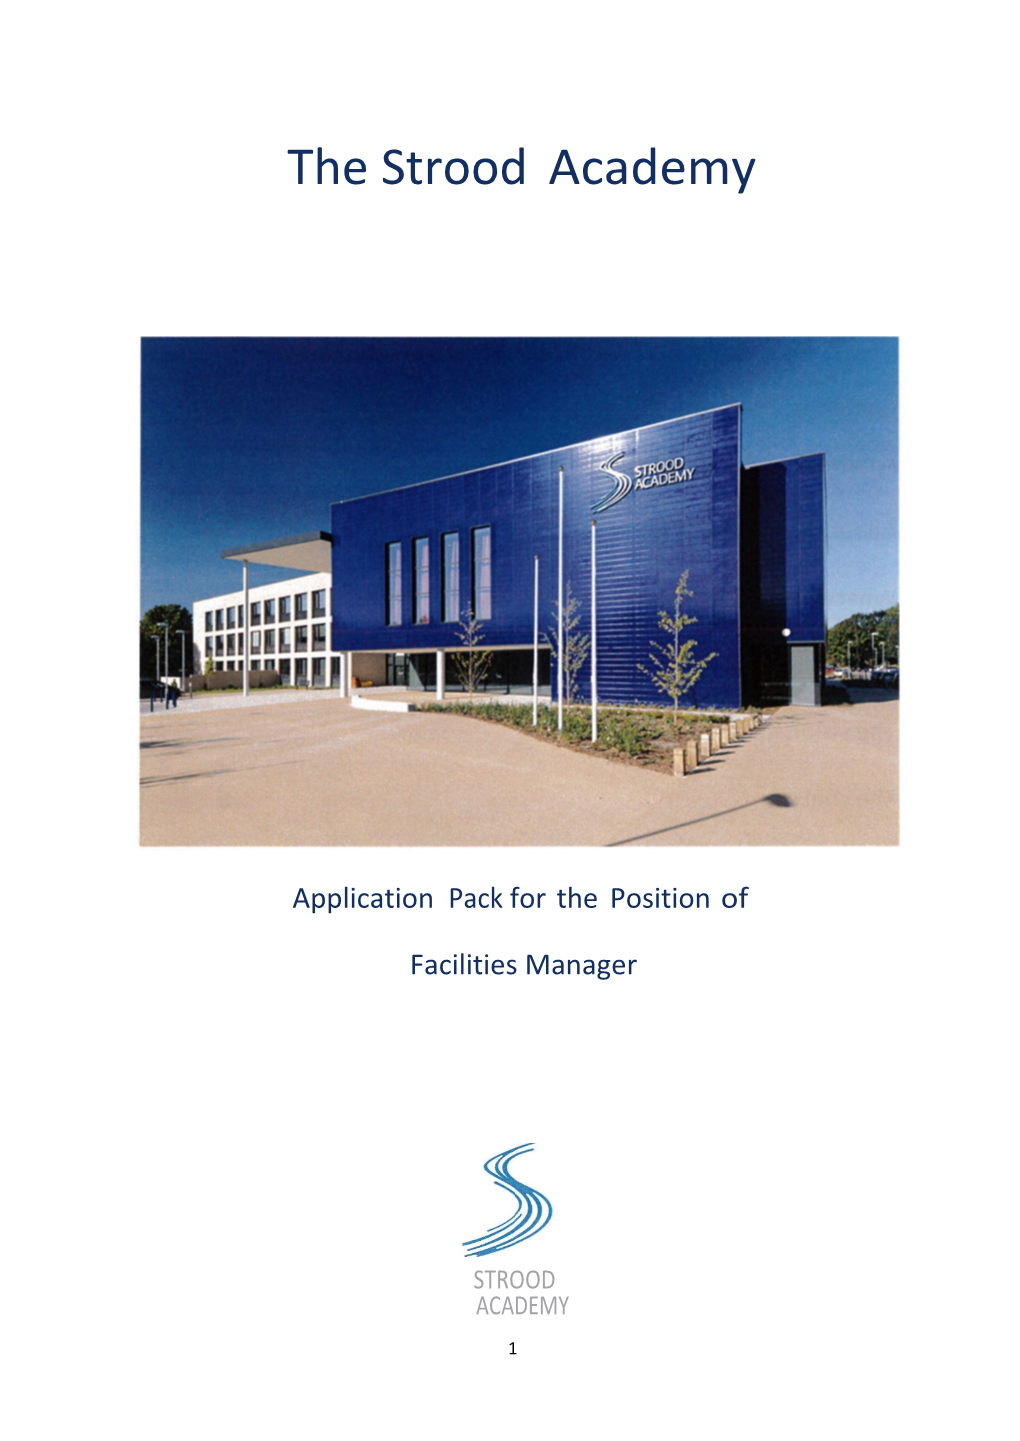 Application Packforthepositionof: Facilities Manager